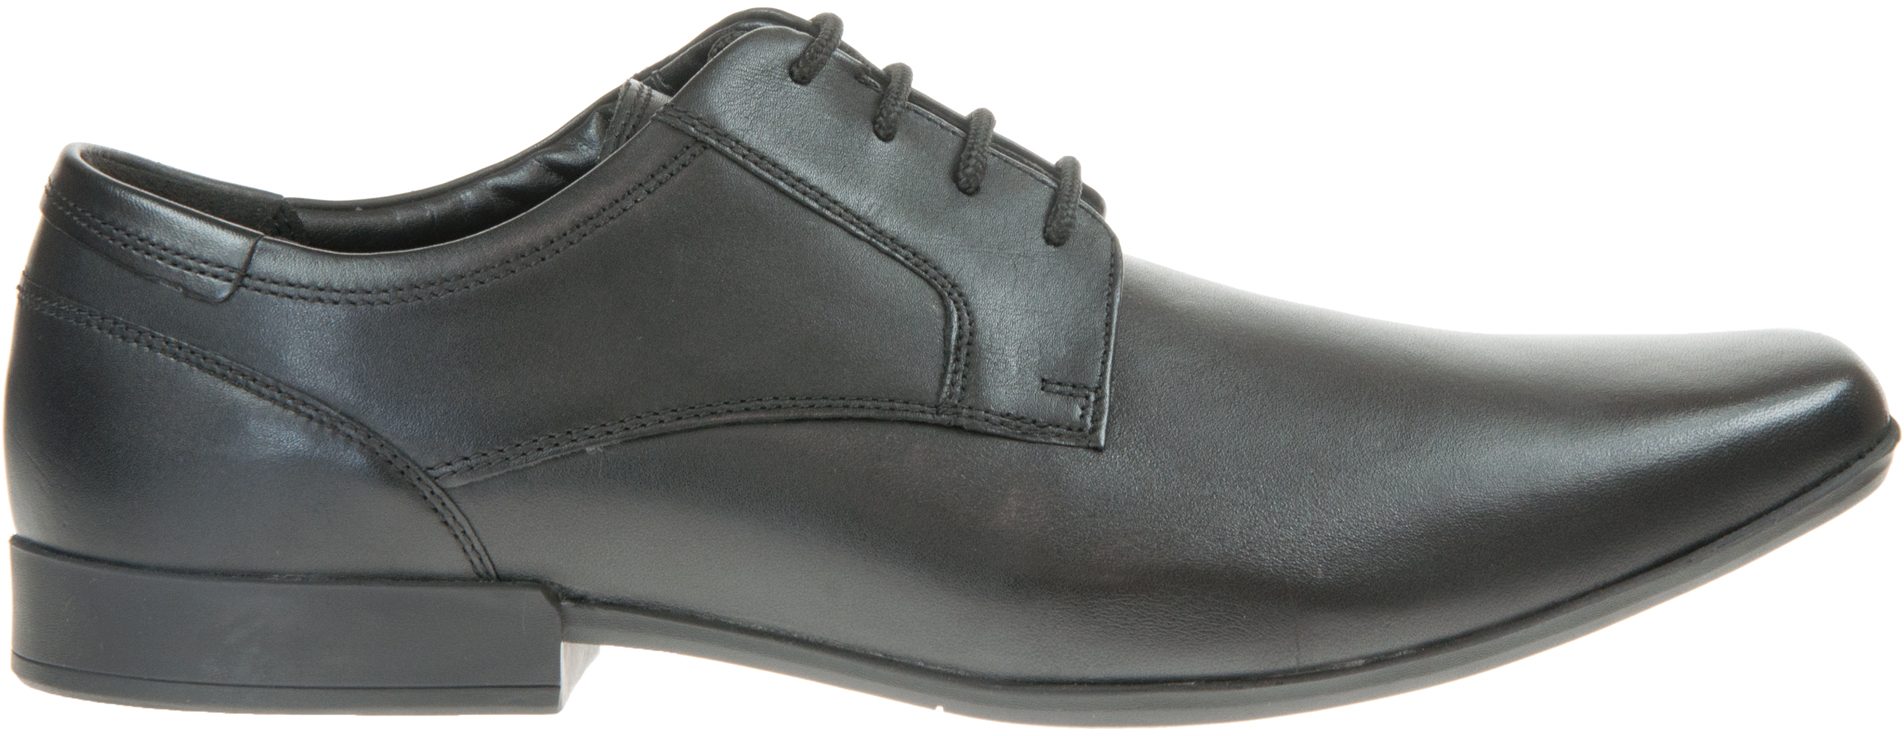 Clarks Sidton Lace Black Leather 26165446 - Formal Shoes - Humphries Shoes